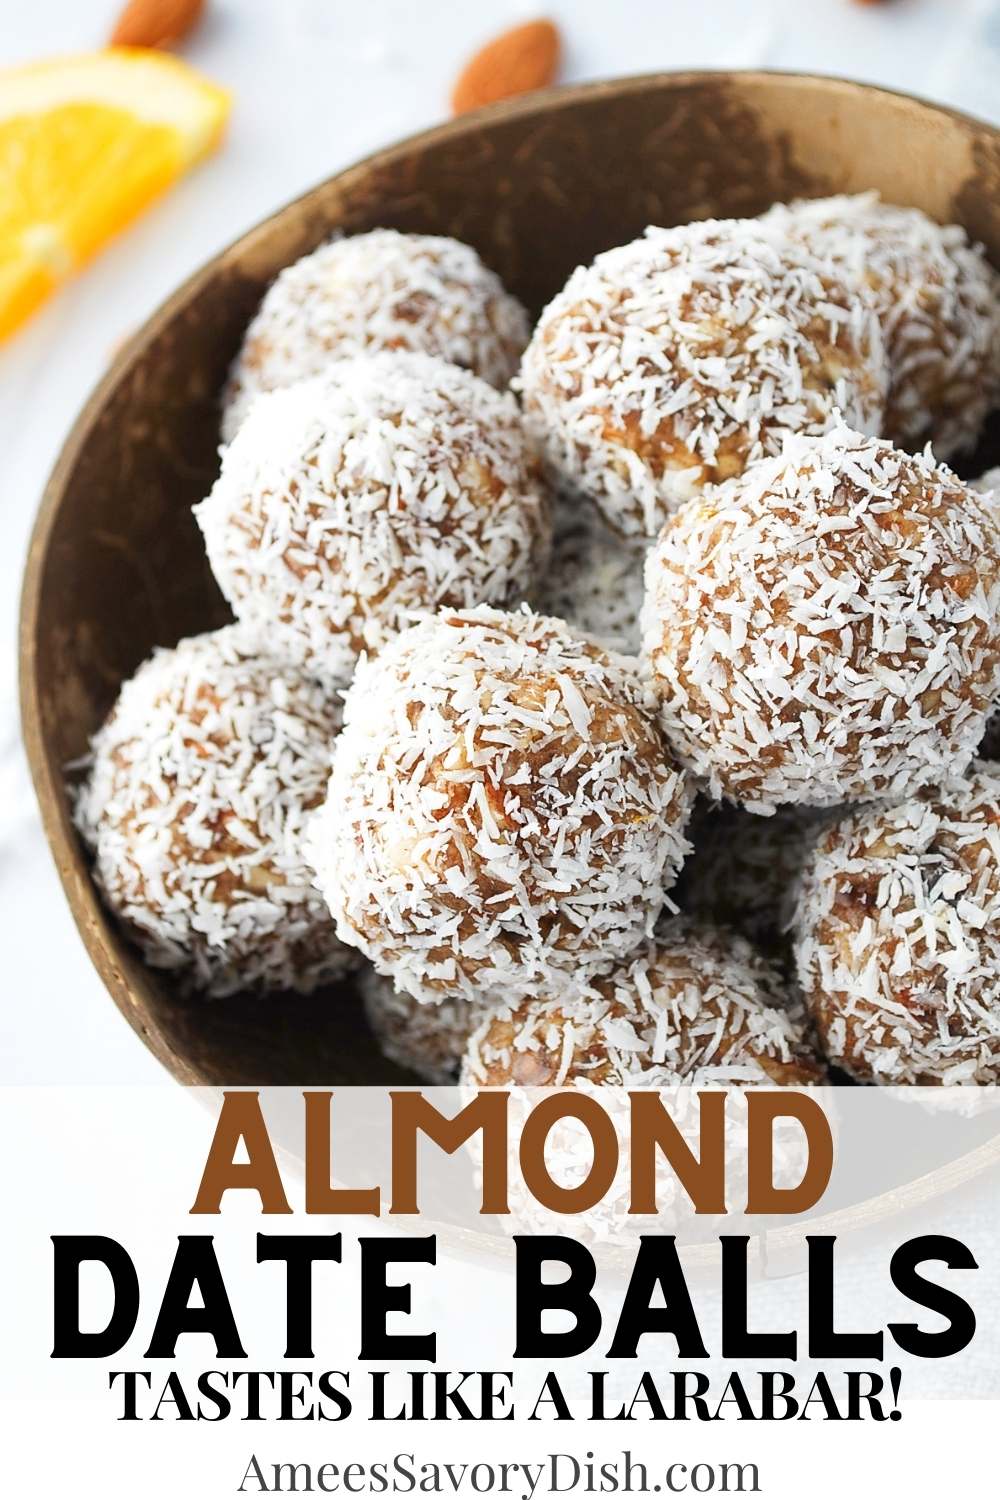 You'll love this copycat ball-shaped version of the popular and tasty Larabars. These coconut almond date balls are made with dried dates, nuts, and fruit. via @Ameessavorydish